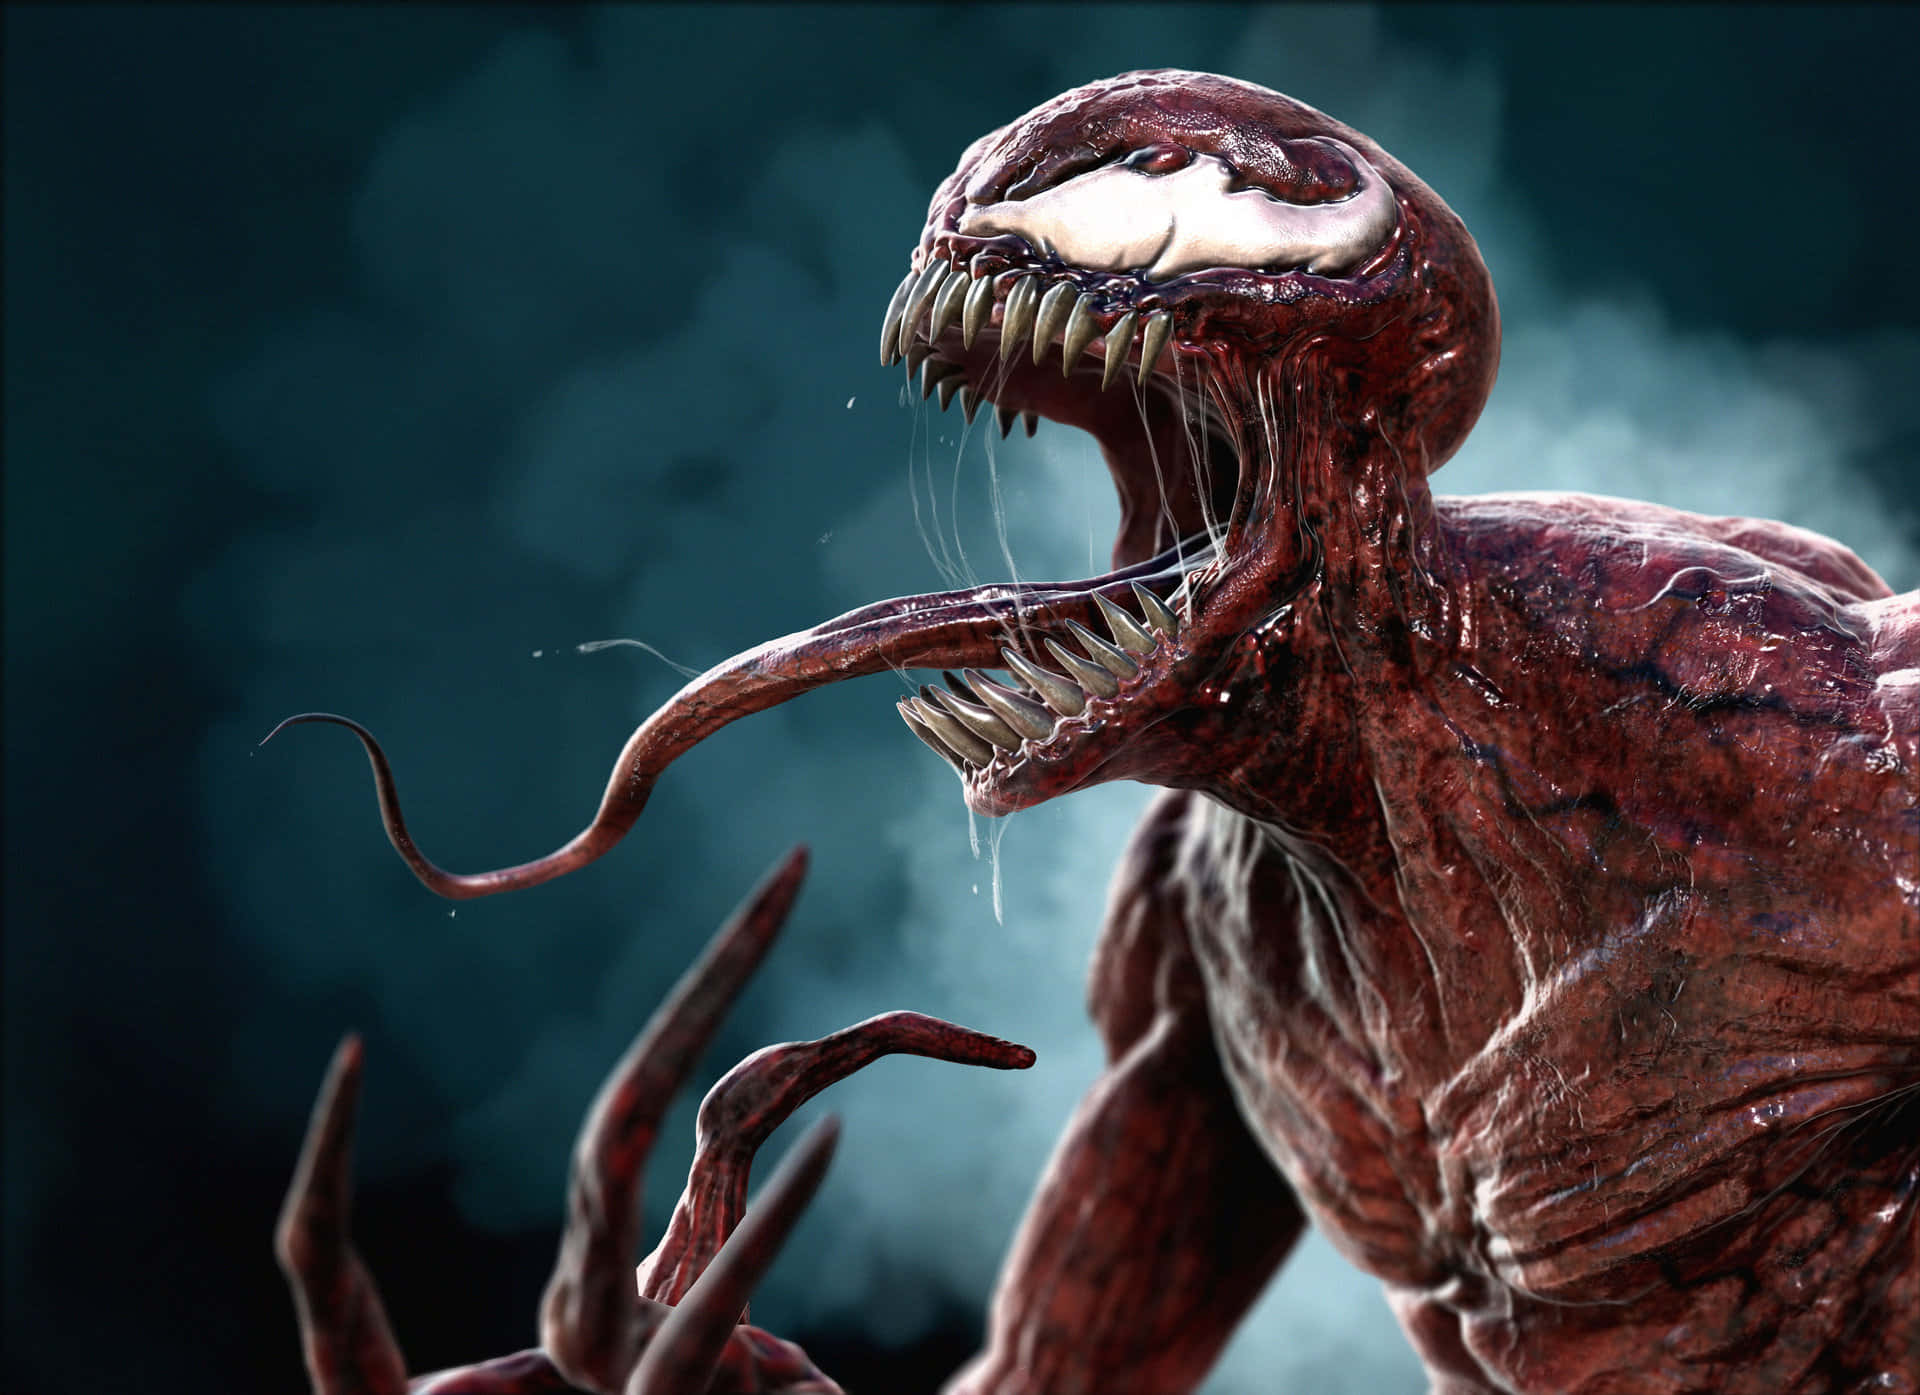 The menacing Spider-Man nemesis, Carnage, featured in a high-resolution background image